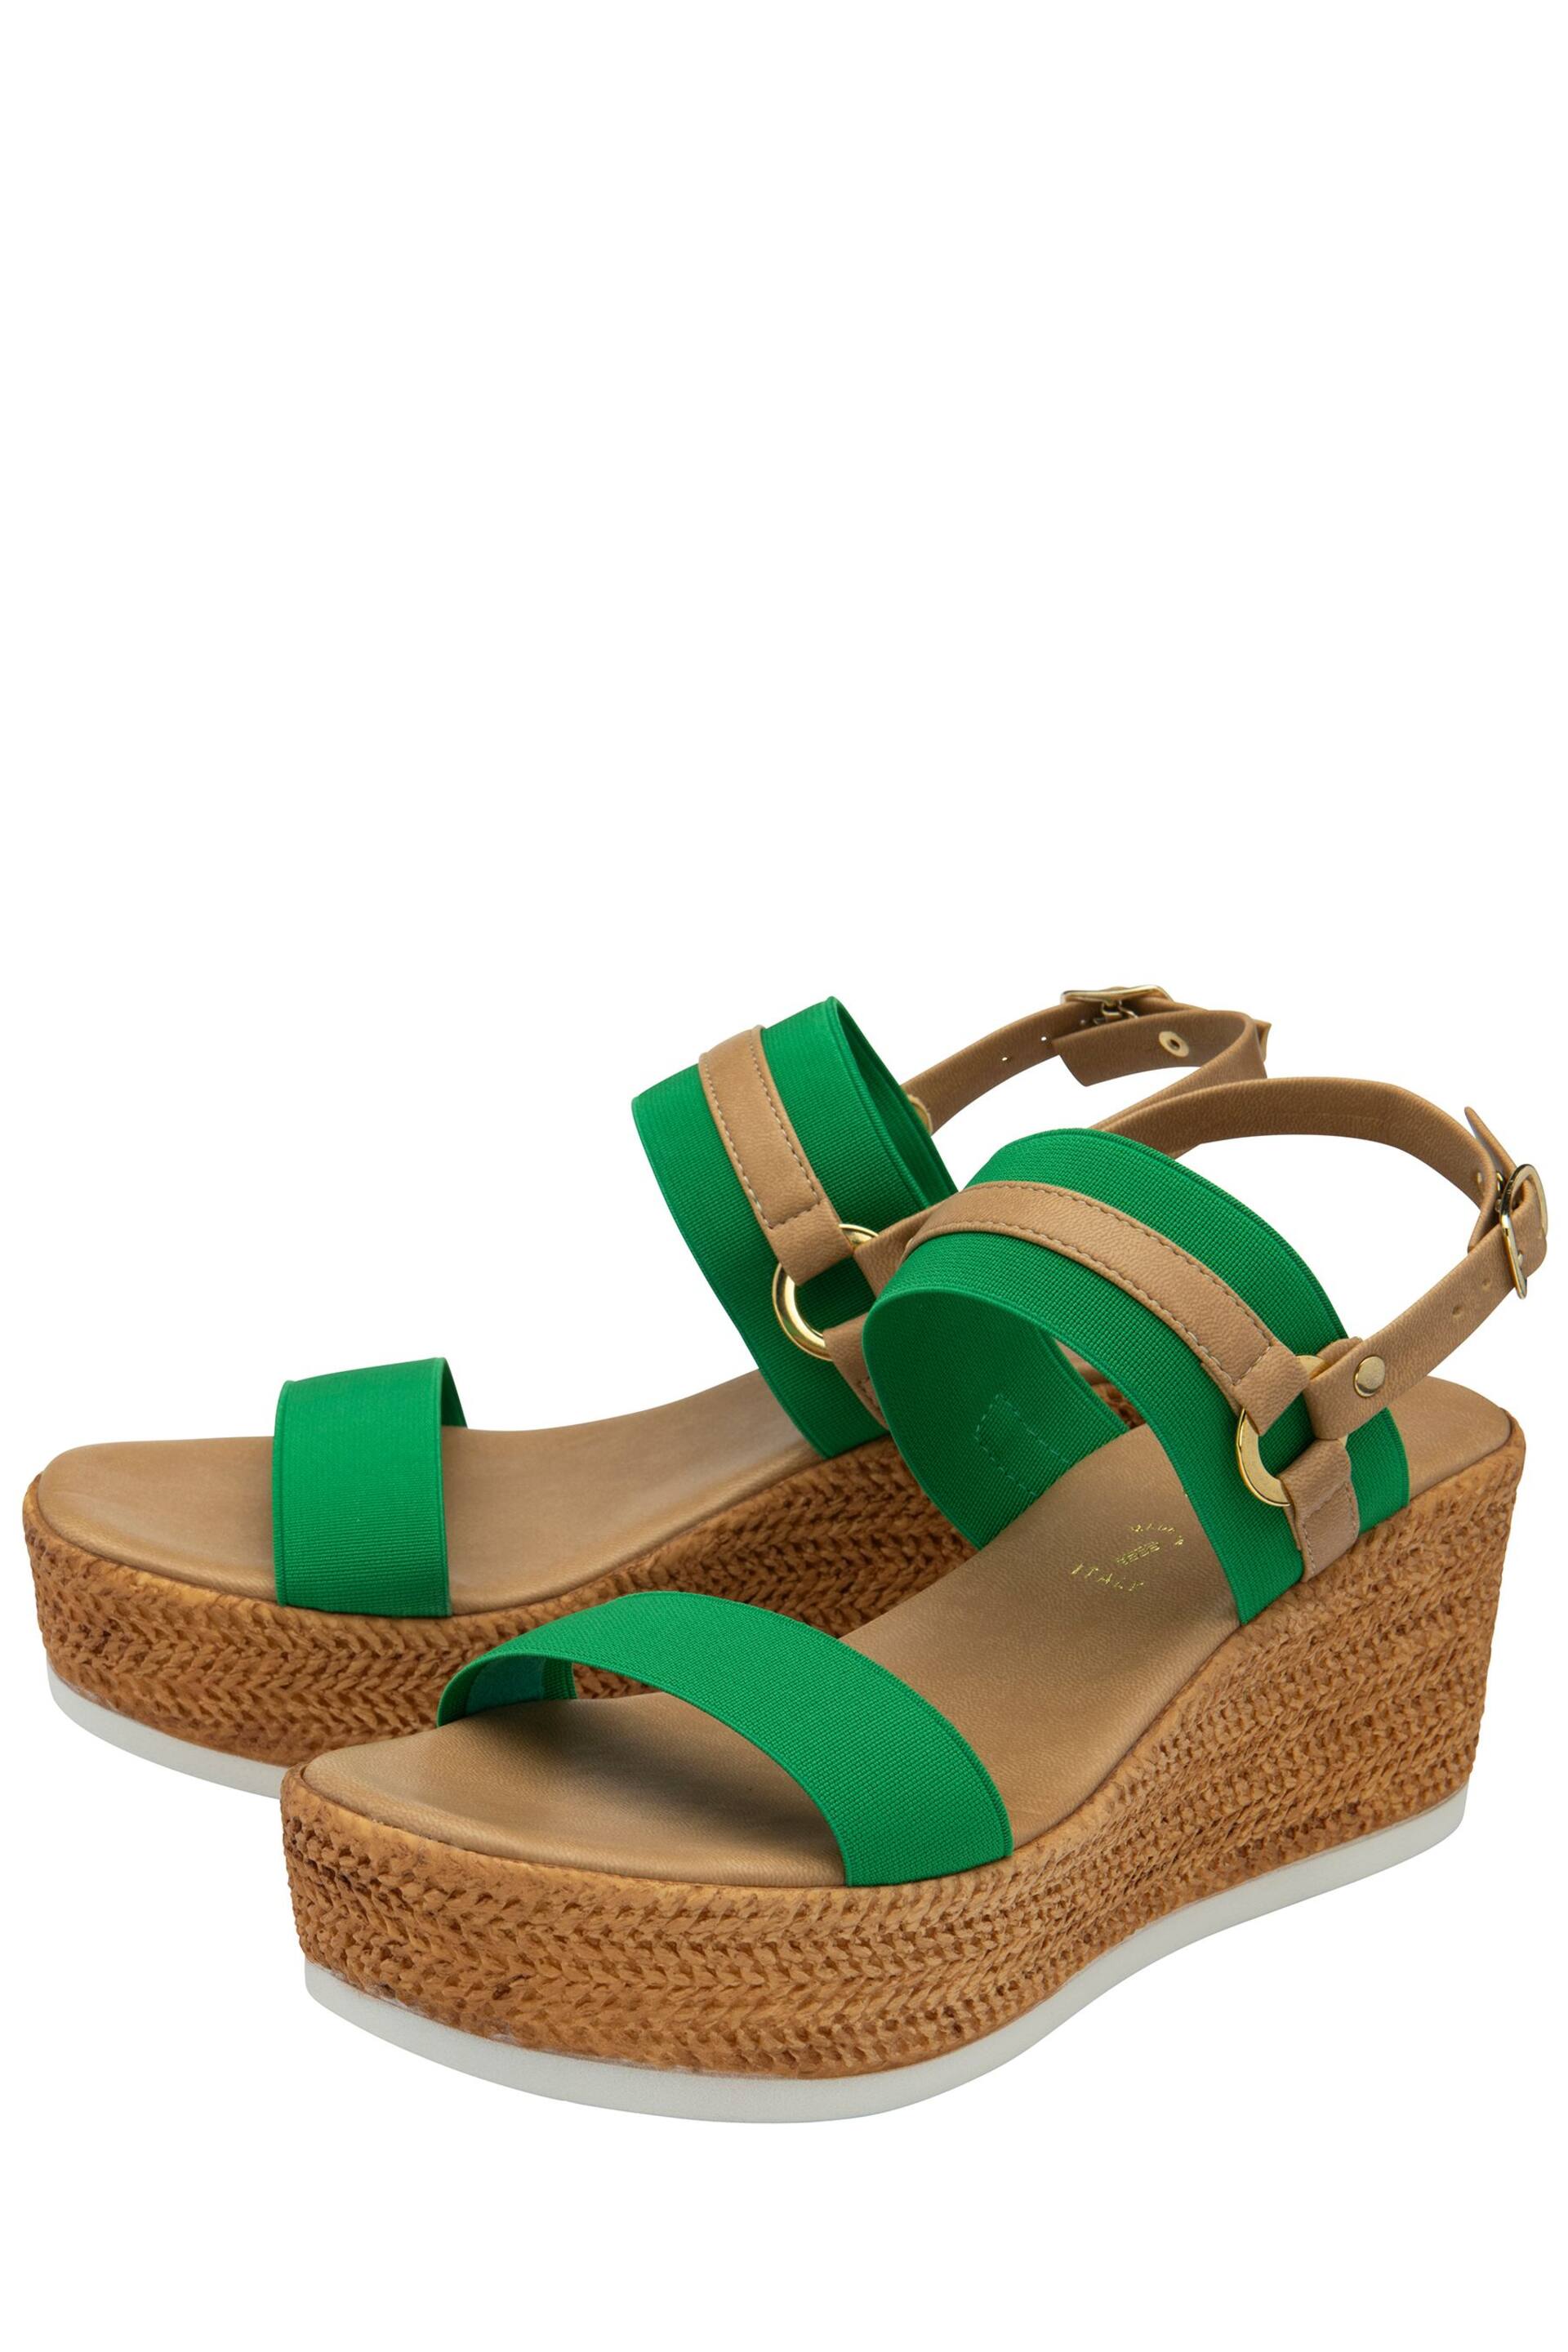 Lotus Green Open-Toe Wedge Sandals - Image 2 of 4